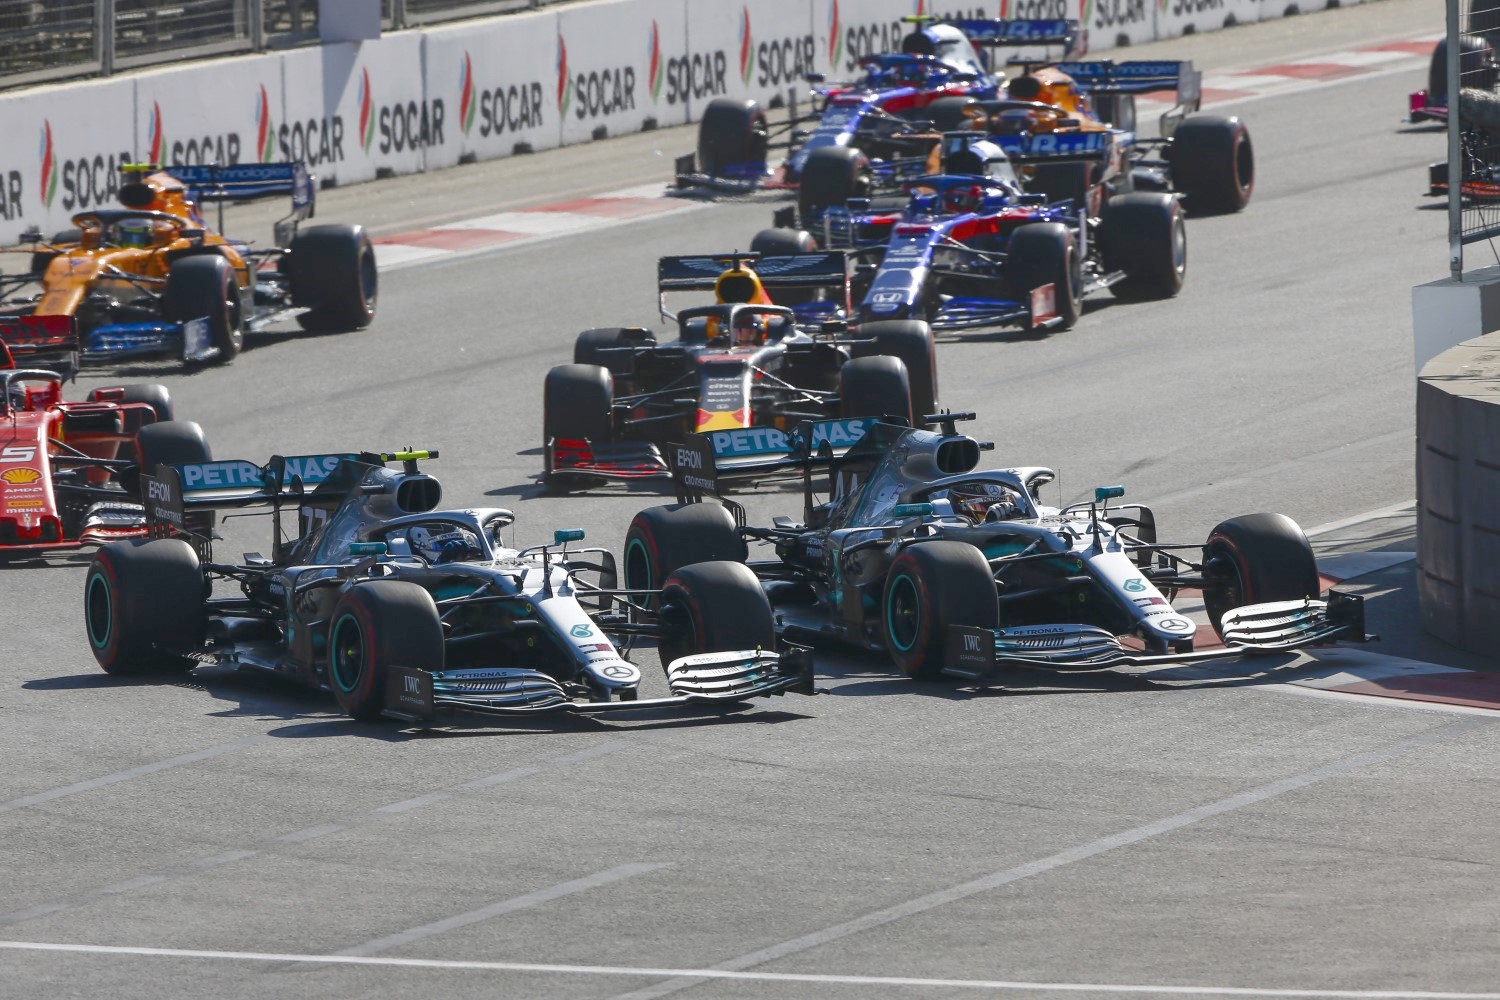 Hamilton and Bottas battled side-by-side in Turn 1. They dominated the race and left Ferrari sucking their fumes once again